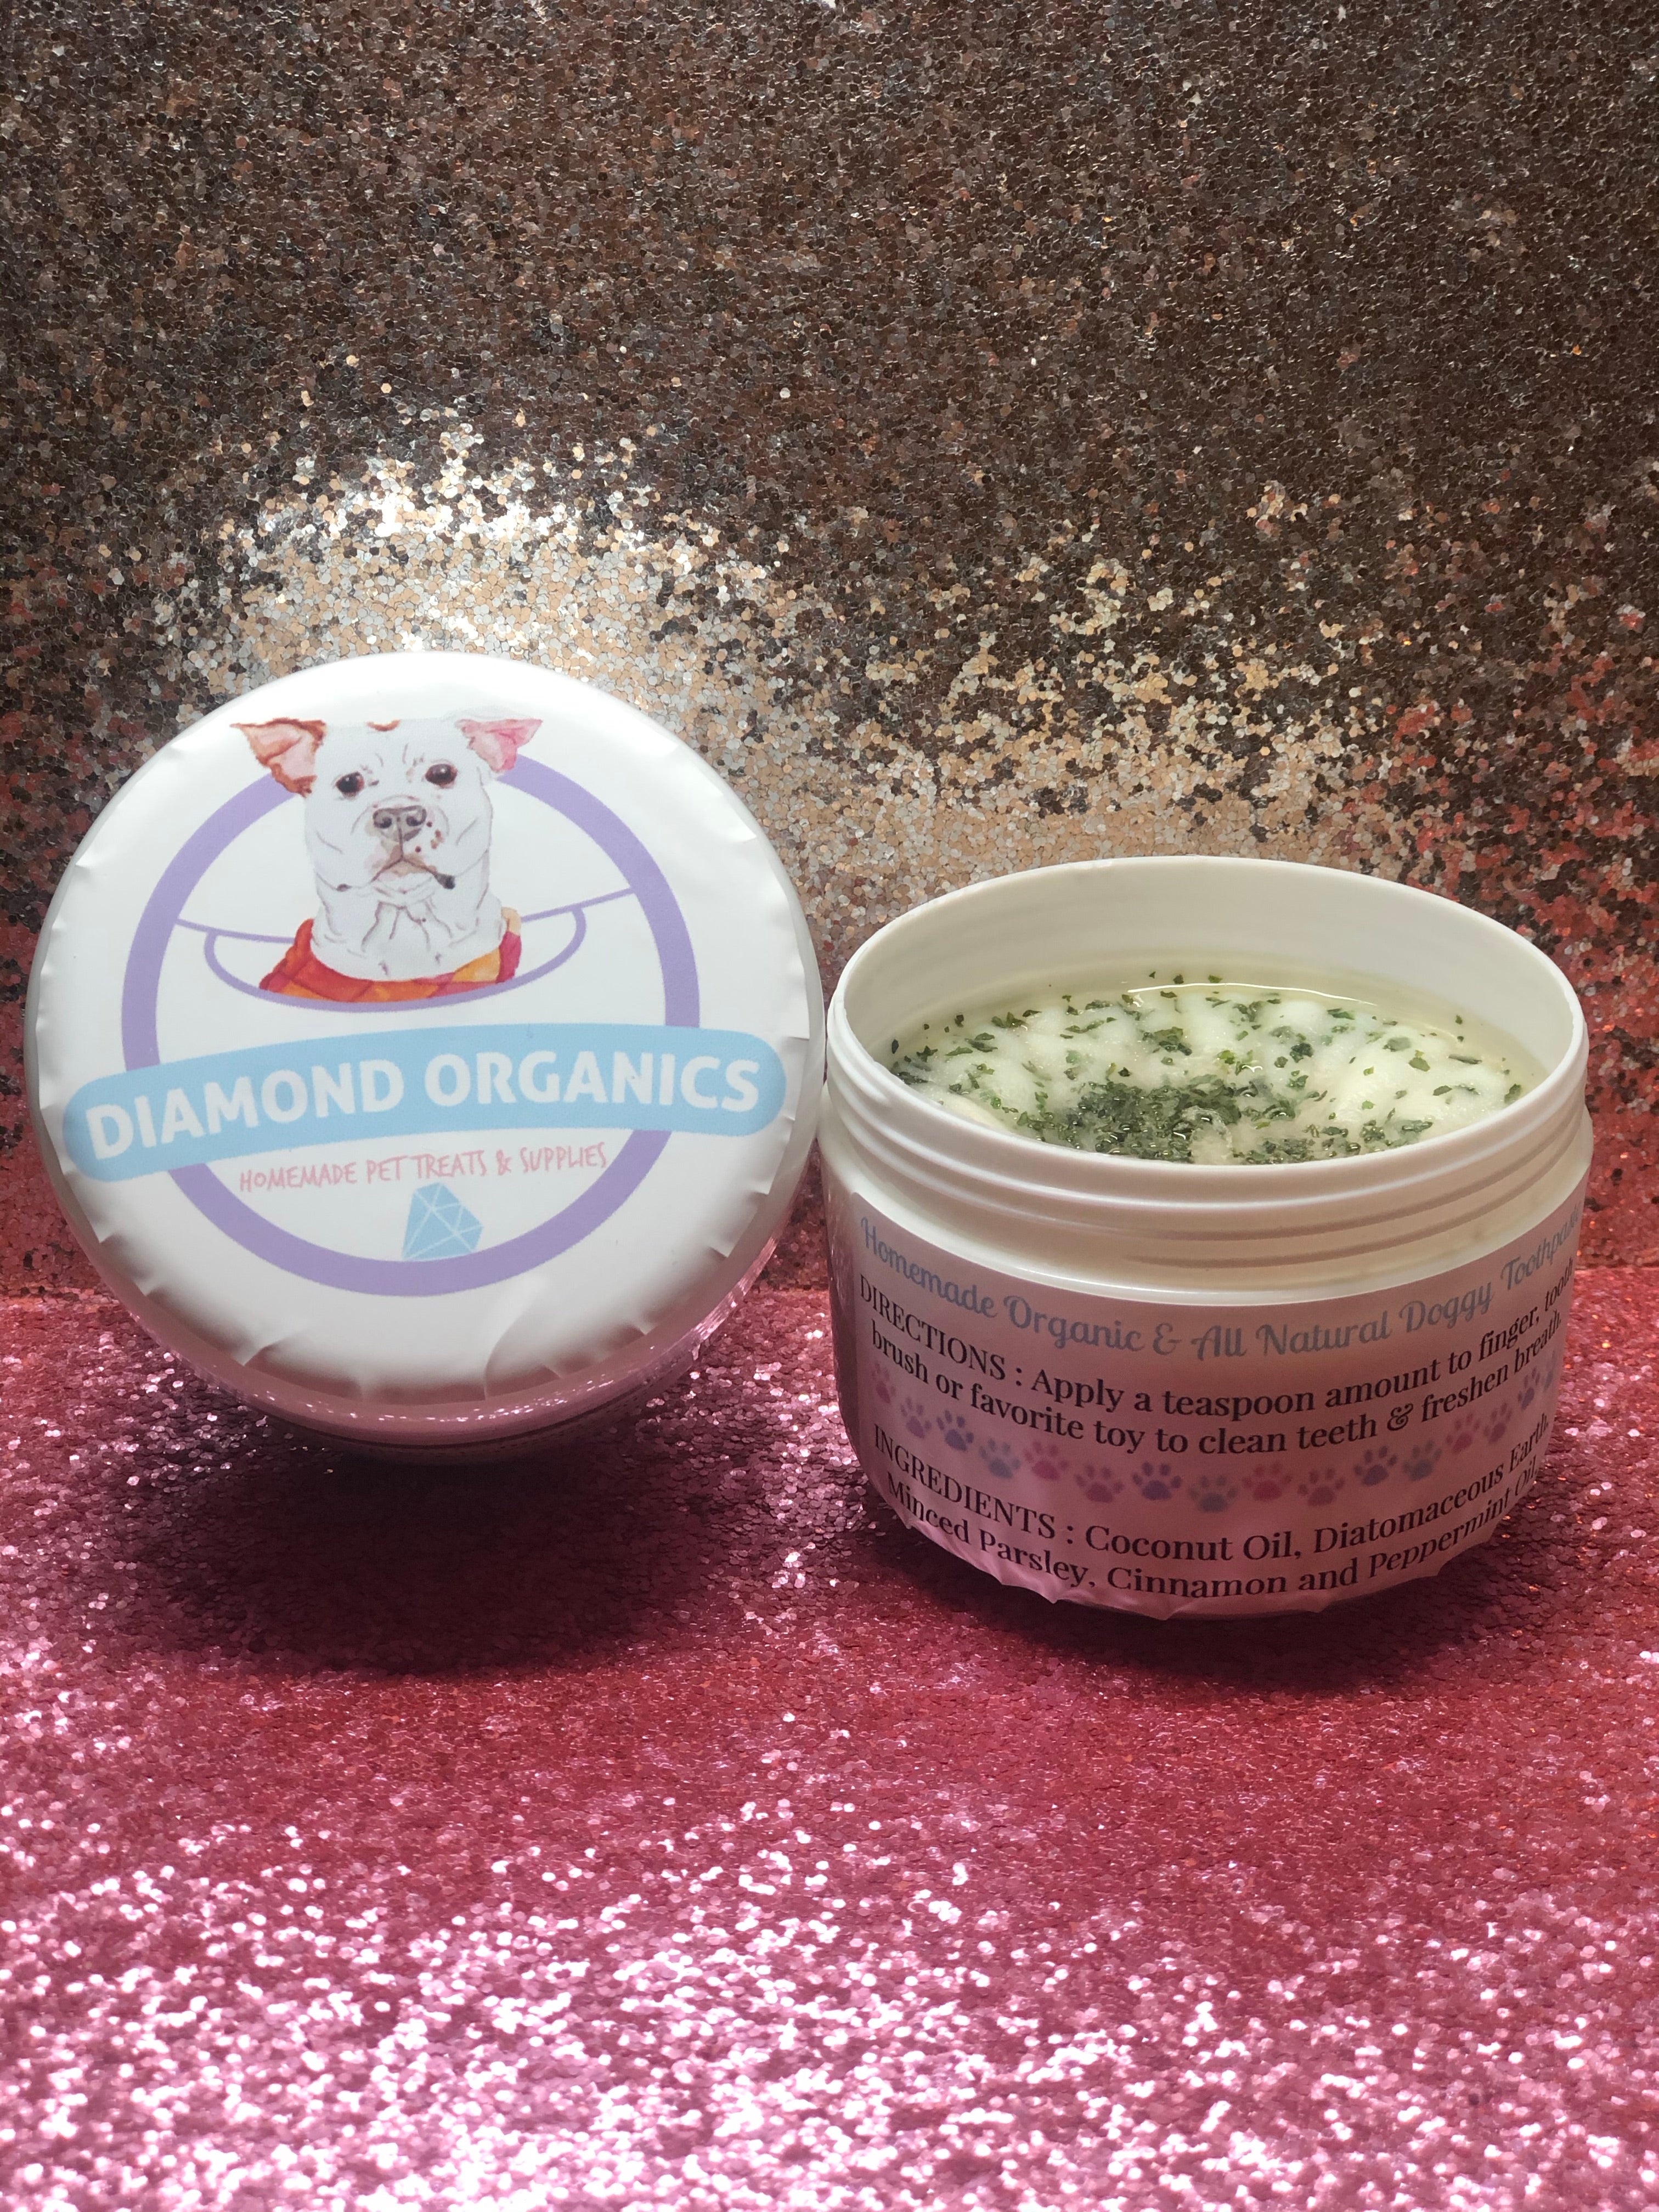 Homemade organic & all natural doggy toothpaste